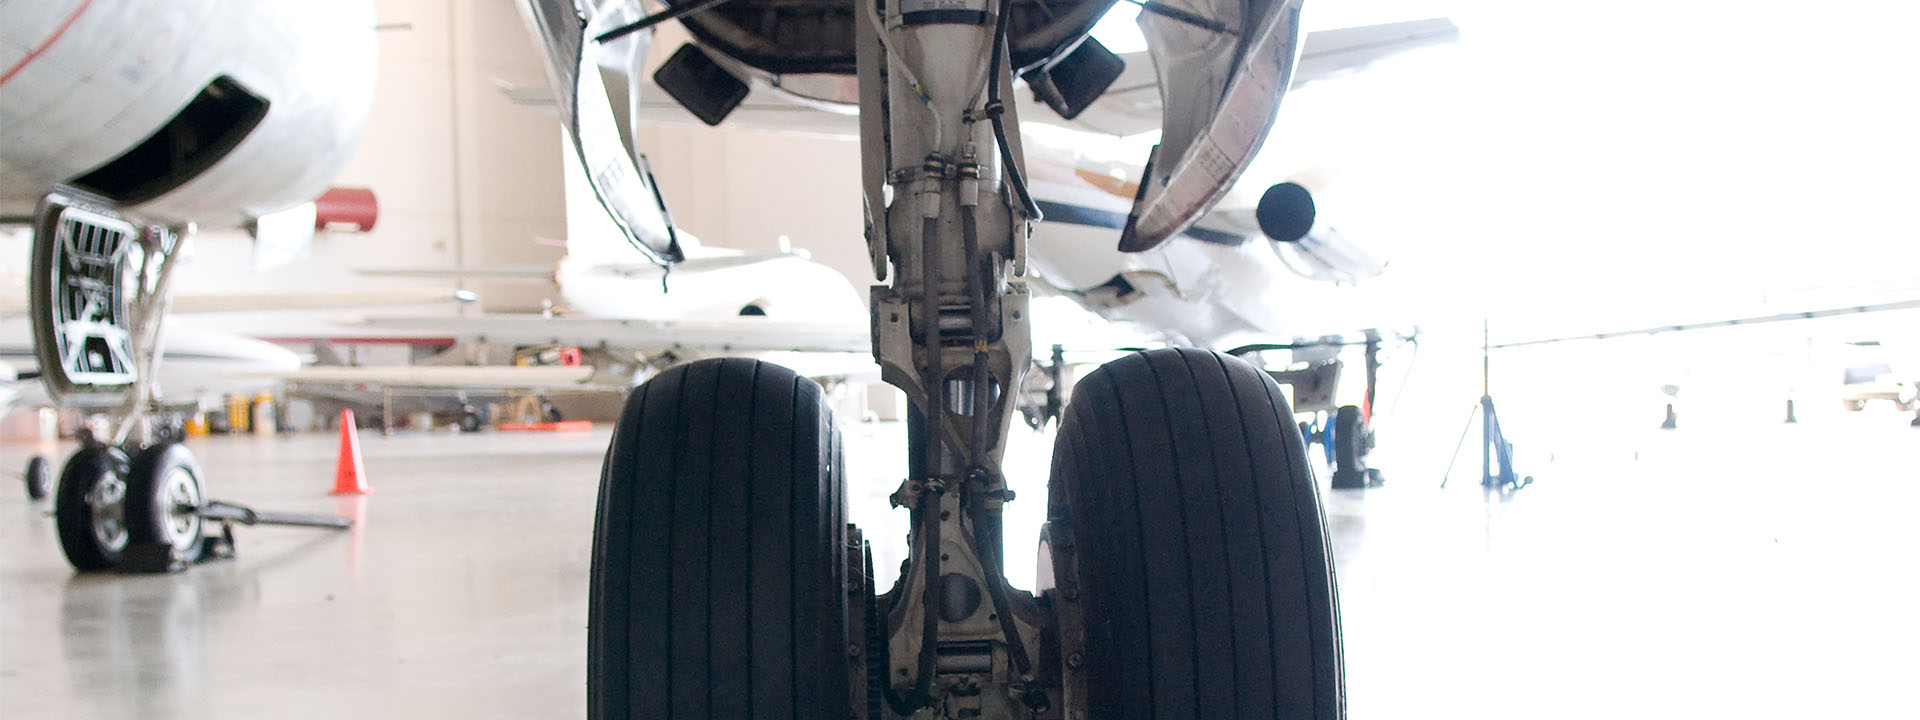 Landing gear and wheels of an airplane